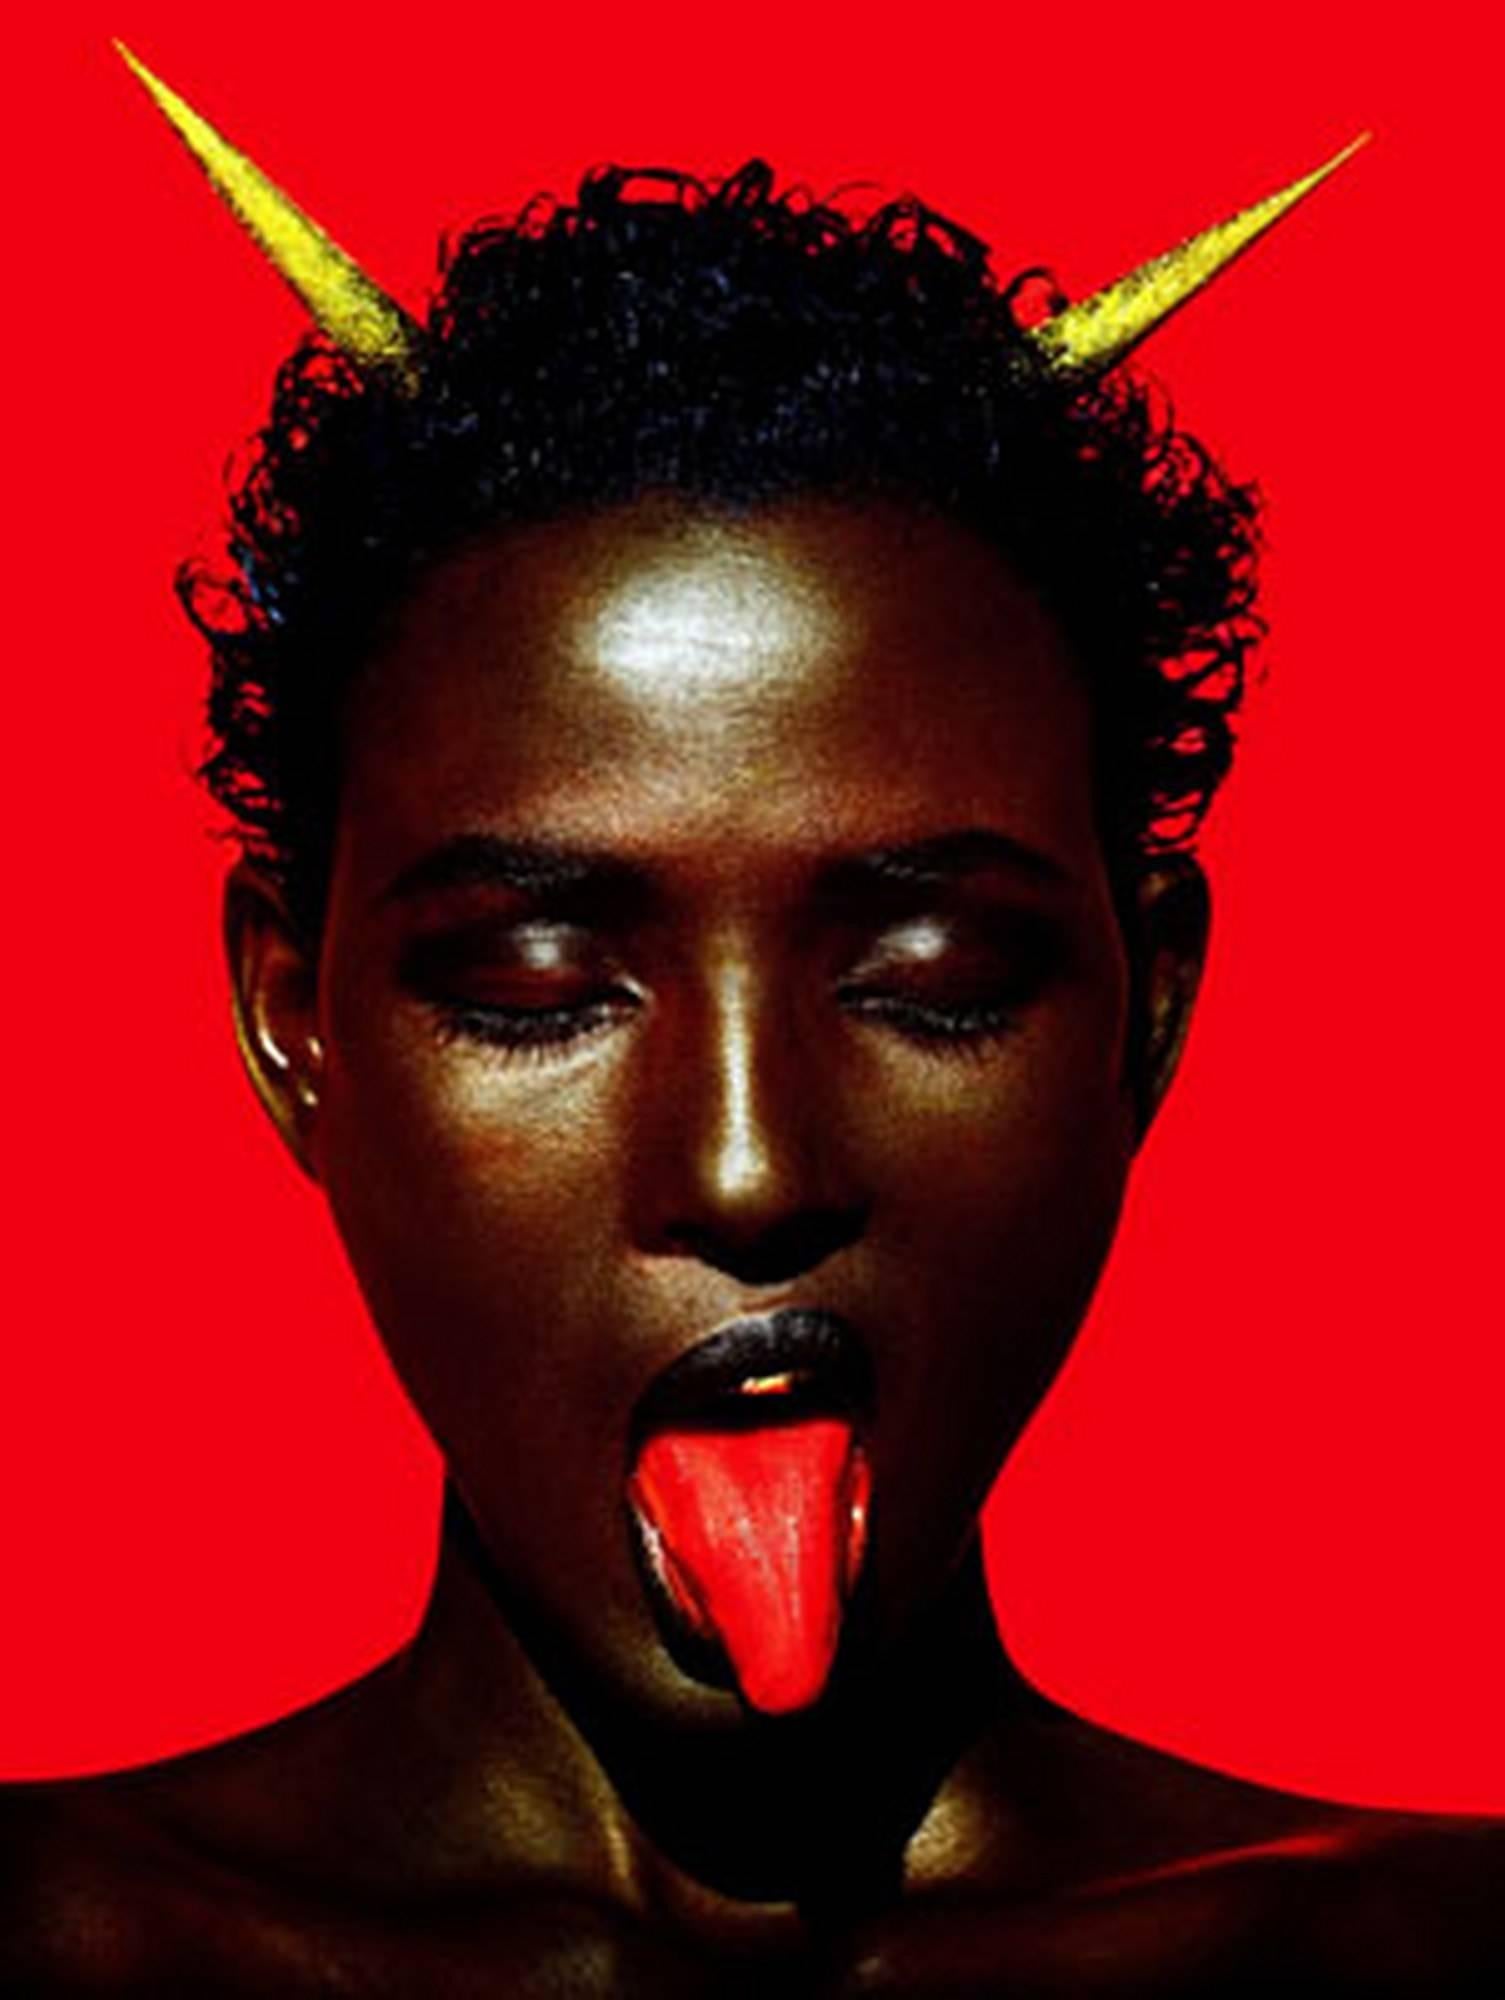 Albert Watson Portrait Photograph - Waris Dirie Marrakech - iconic supermodel with red in the background